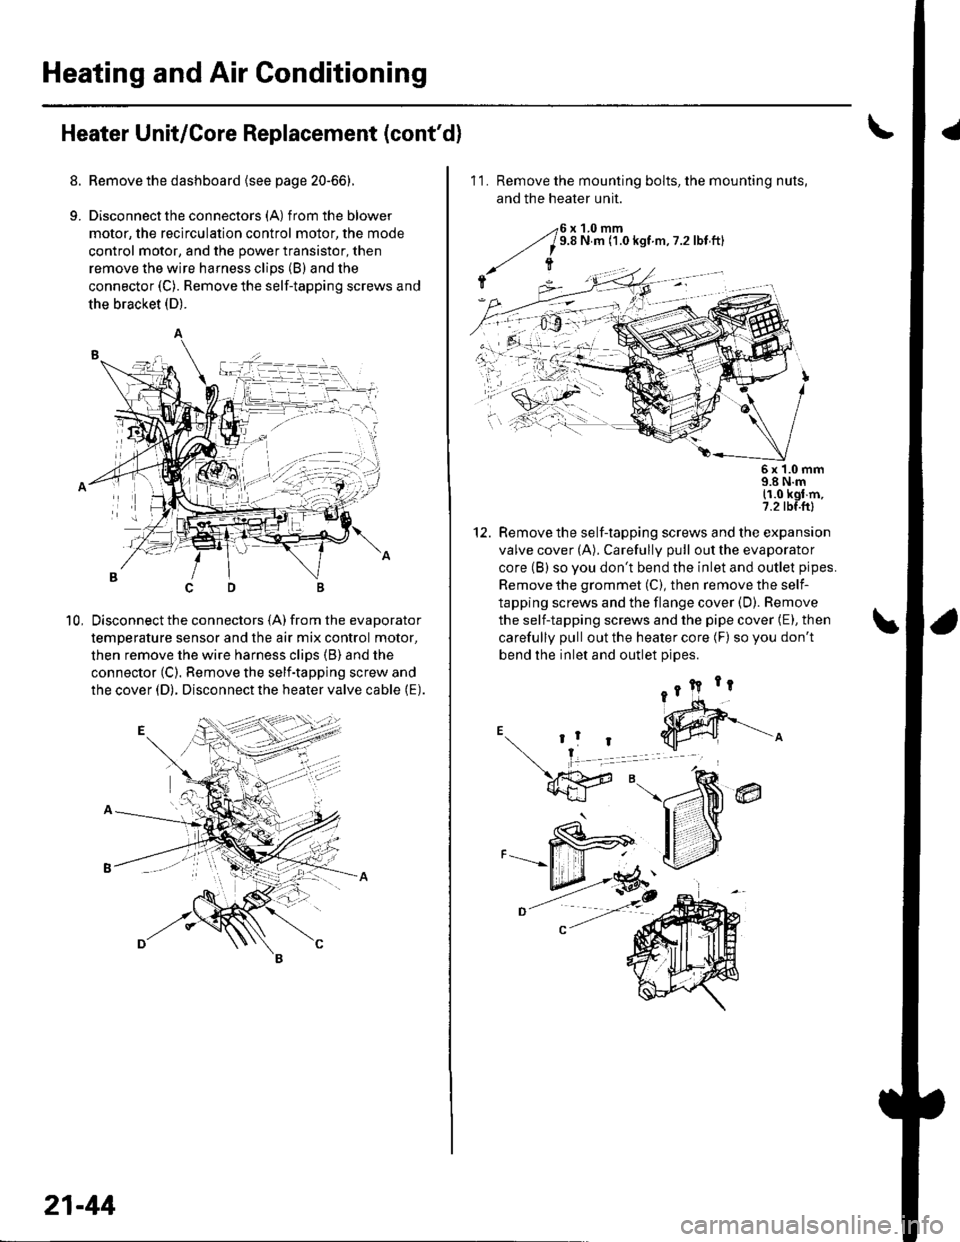 HONDA CIVIC 2003 7.G User Guide Heating and Air Conditioning
Heater Unit/Core Replacement (contd)
8. Remove the dashboard {see page 20-66).
9. Disconnectthe connectors (A) from the blower
motor, the recirculation control motor, the